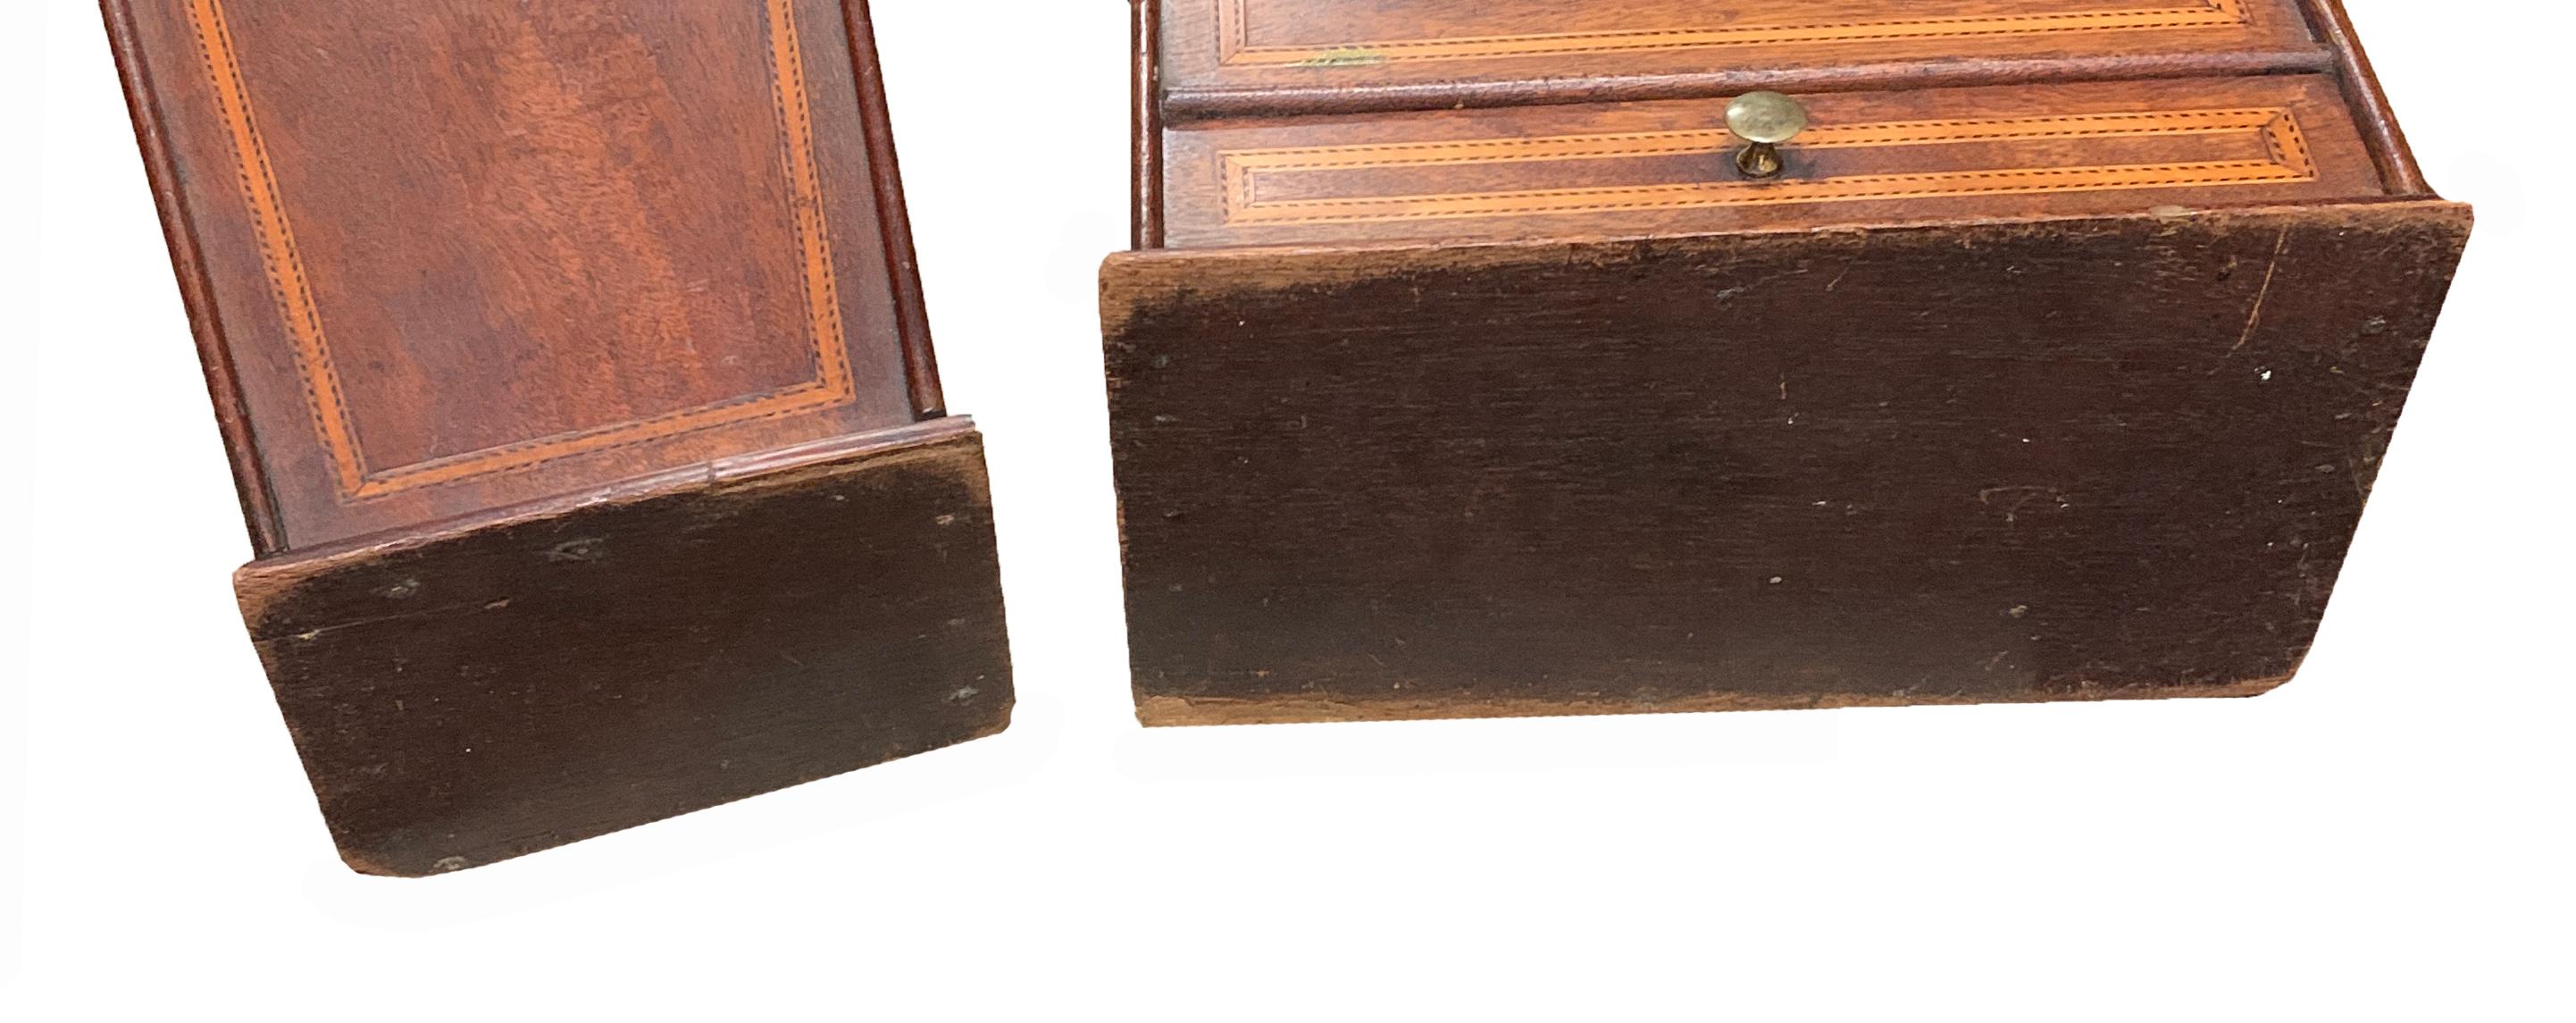 Rare Pair of 18th Century Georgian Mahogany Wall Hanging Boxes For Sale 1